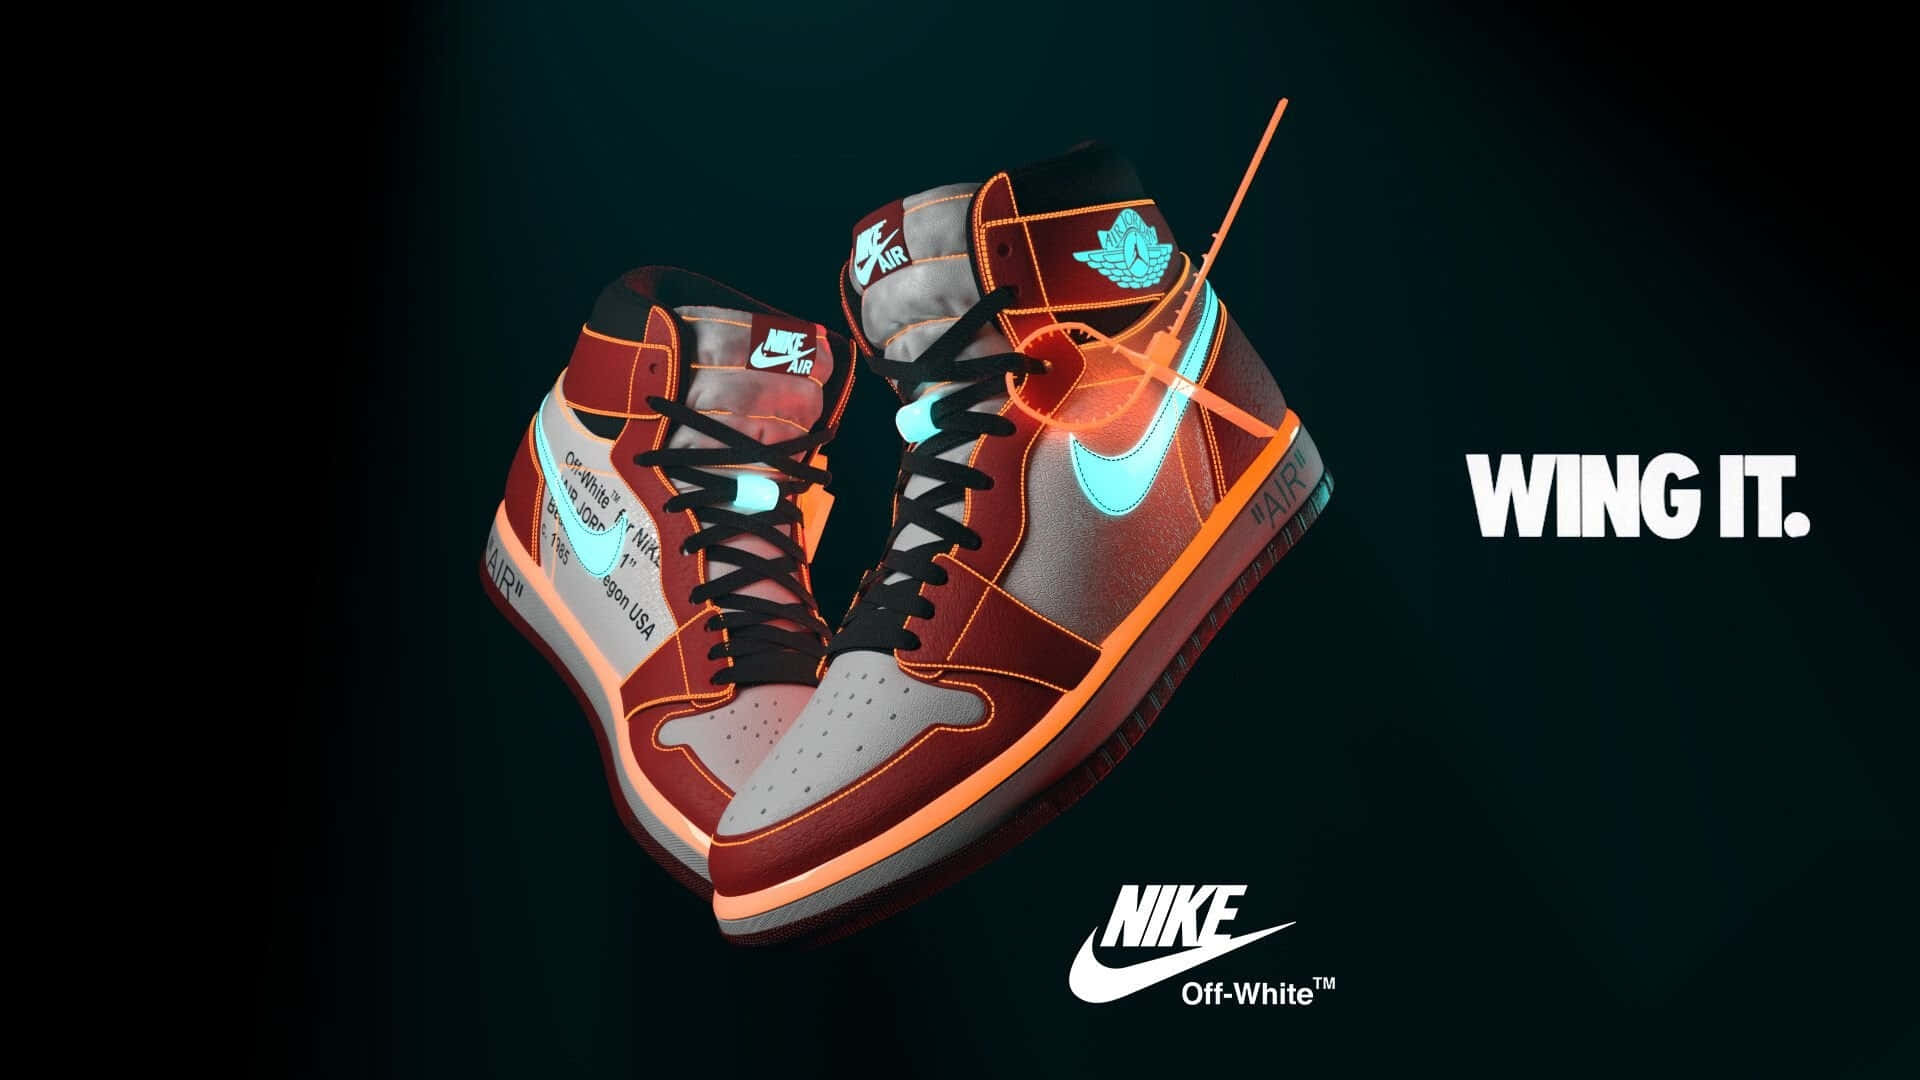 Grab your pair of Off White Jordan 1 sneakers for a limited time only! Wallpaper